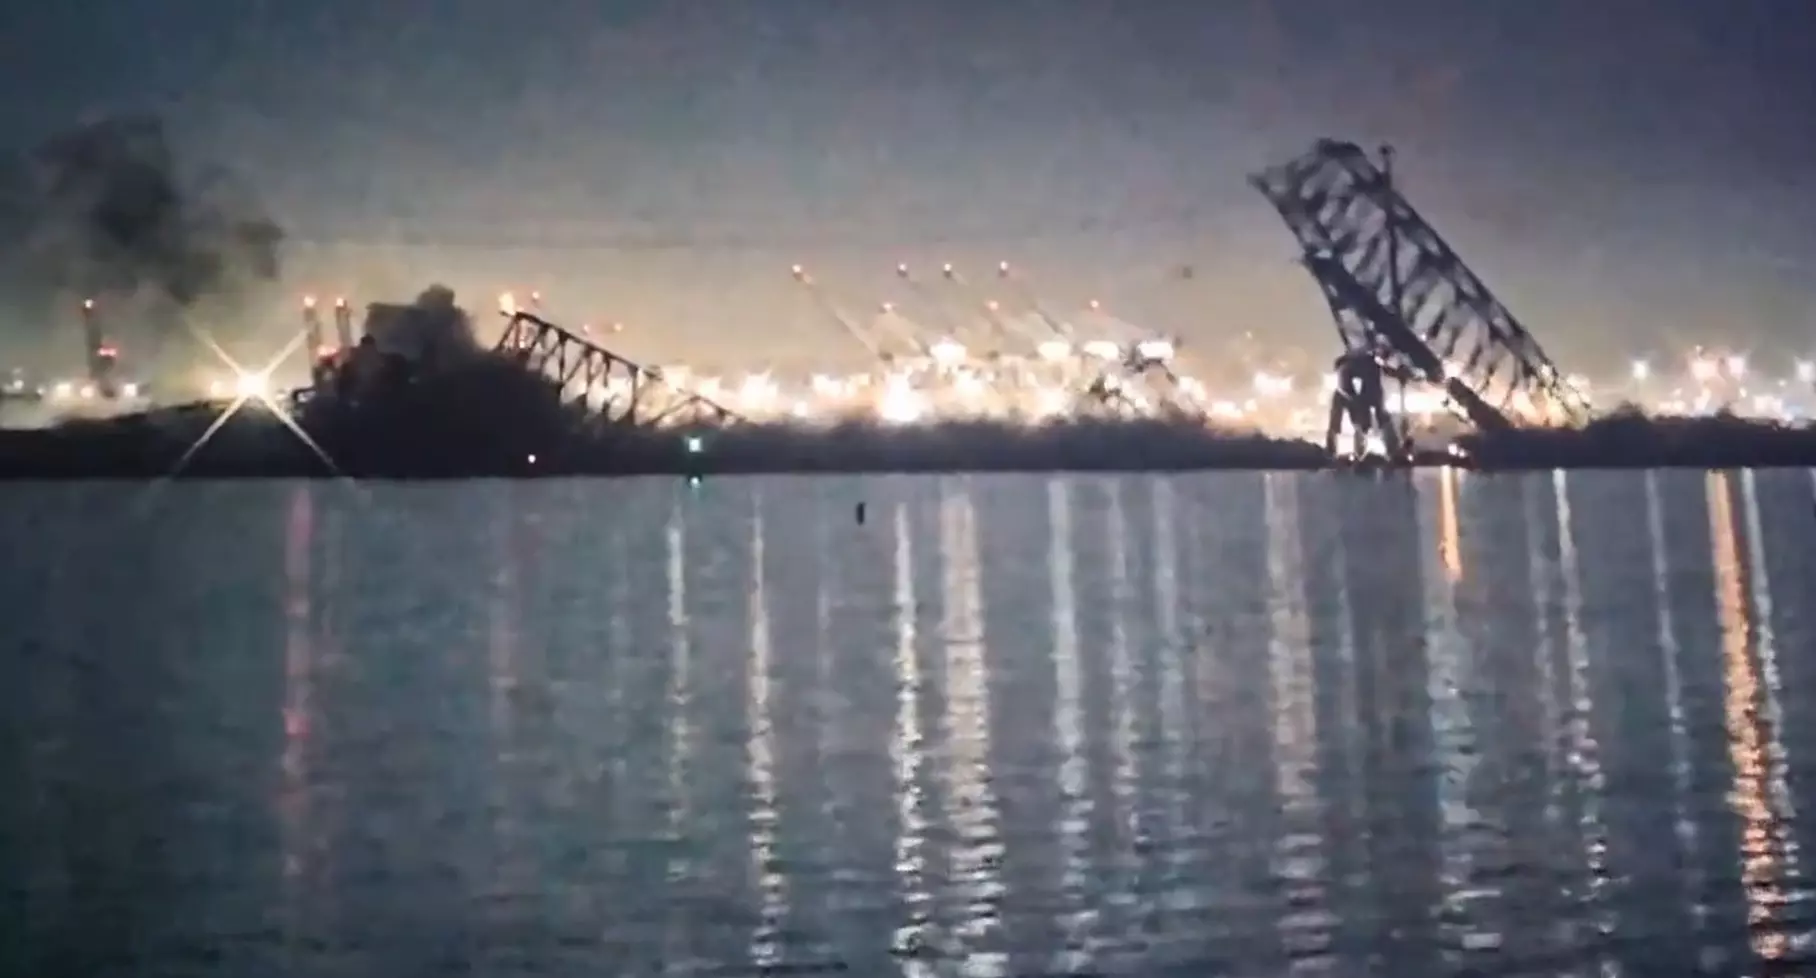 Explained: About Baltimore’s Francis Scott Key Bridge, significance, why it collapsed